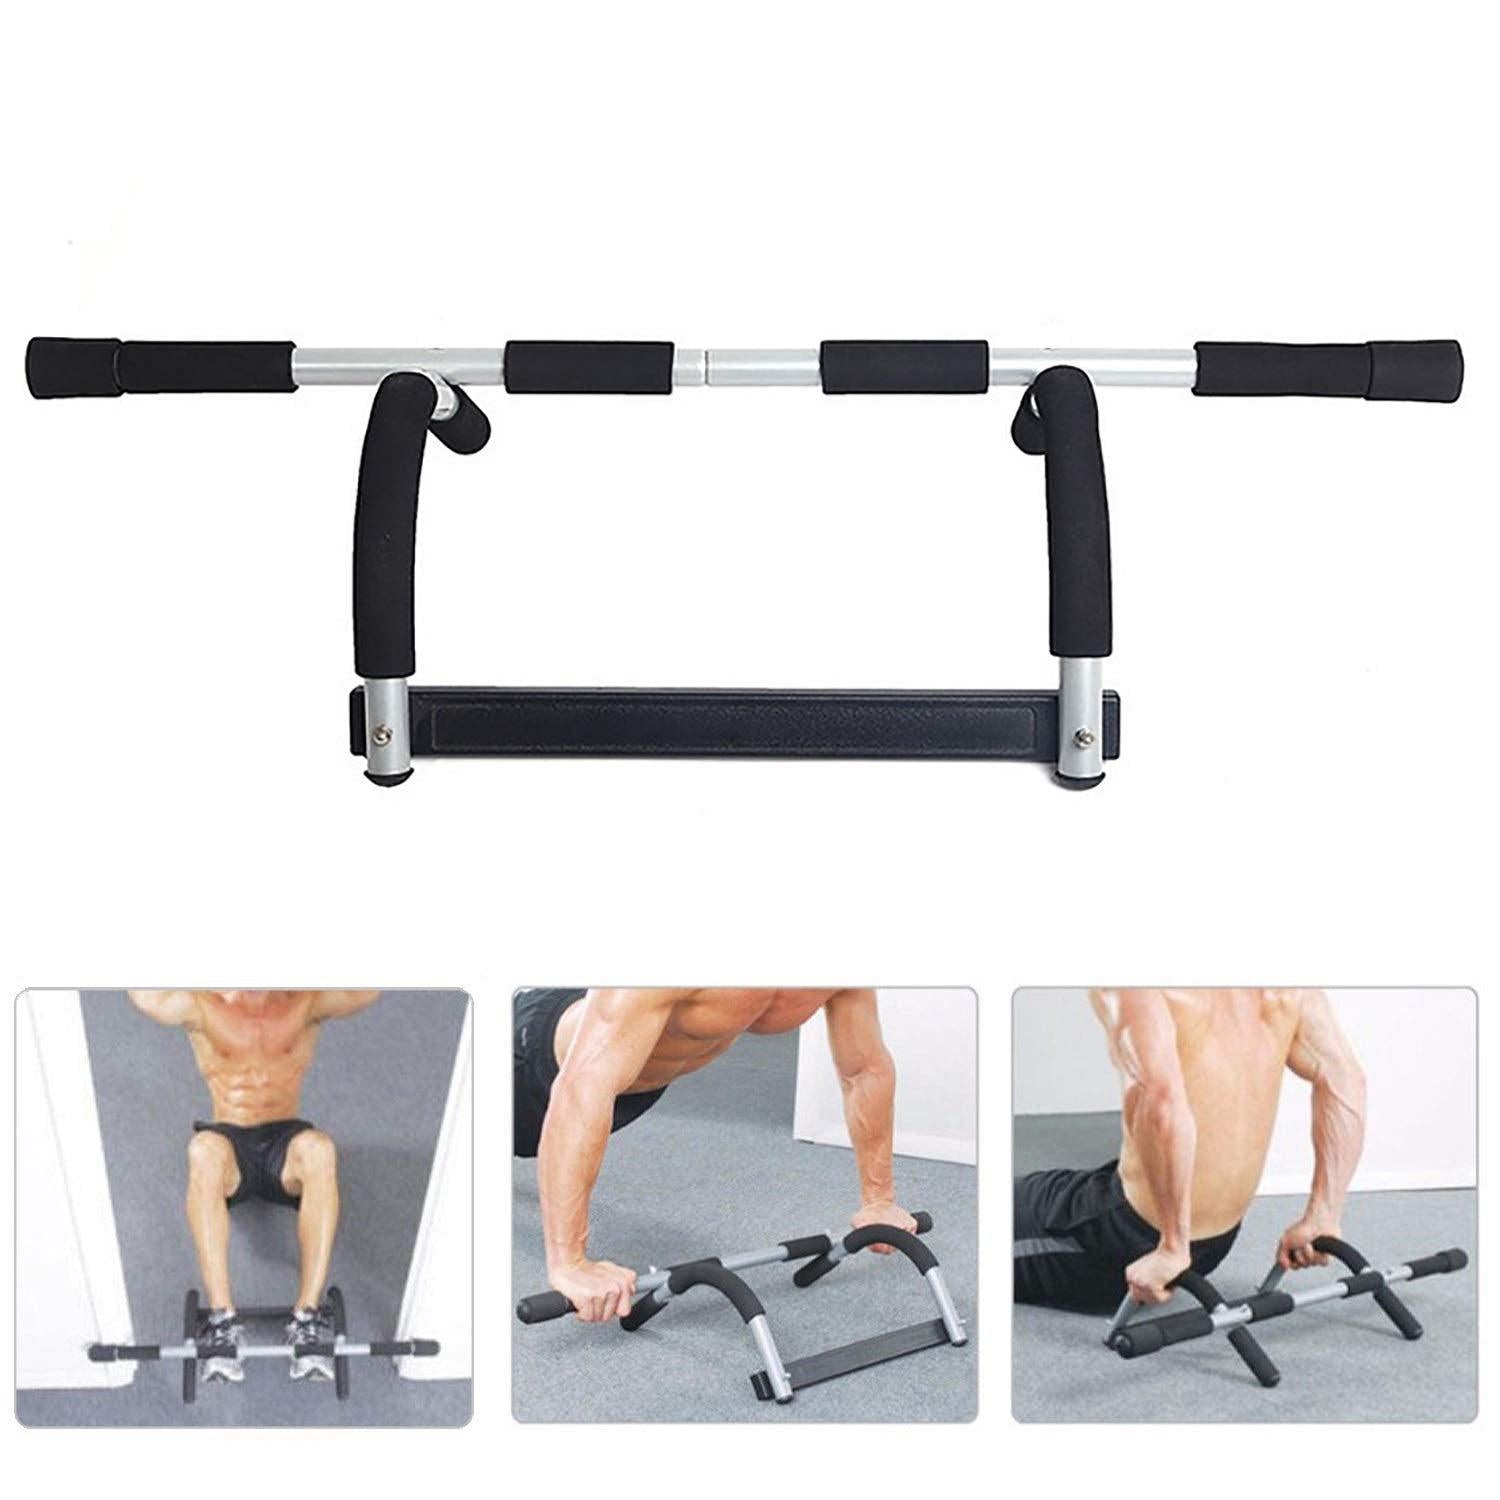 Bosonshop Pull Up Bar Exercise Equipment, Family Gym Indoor